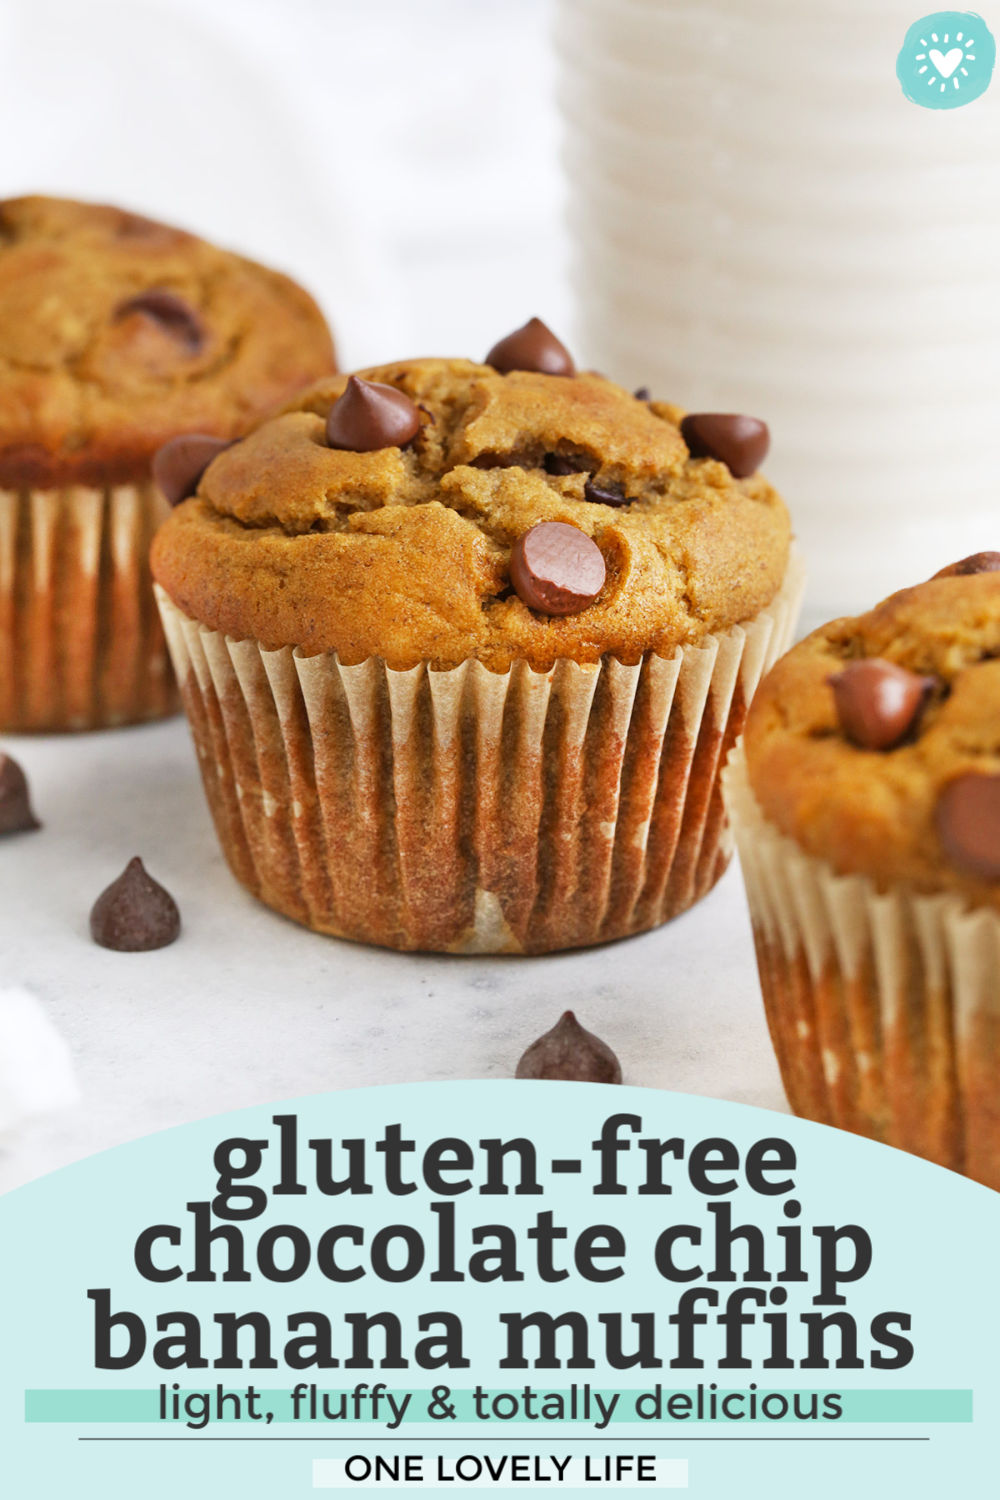 Three Chocolate Chip Banana Muffins on a White background with text overlay that reads "Gluten-Free Chocolate Chip Banana Muffins. Light, Fluffy & Totally Delicious. One Lovely Life."